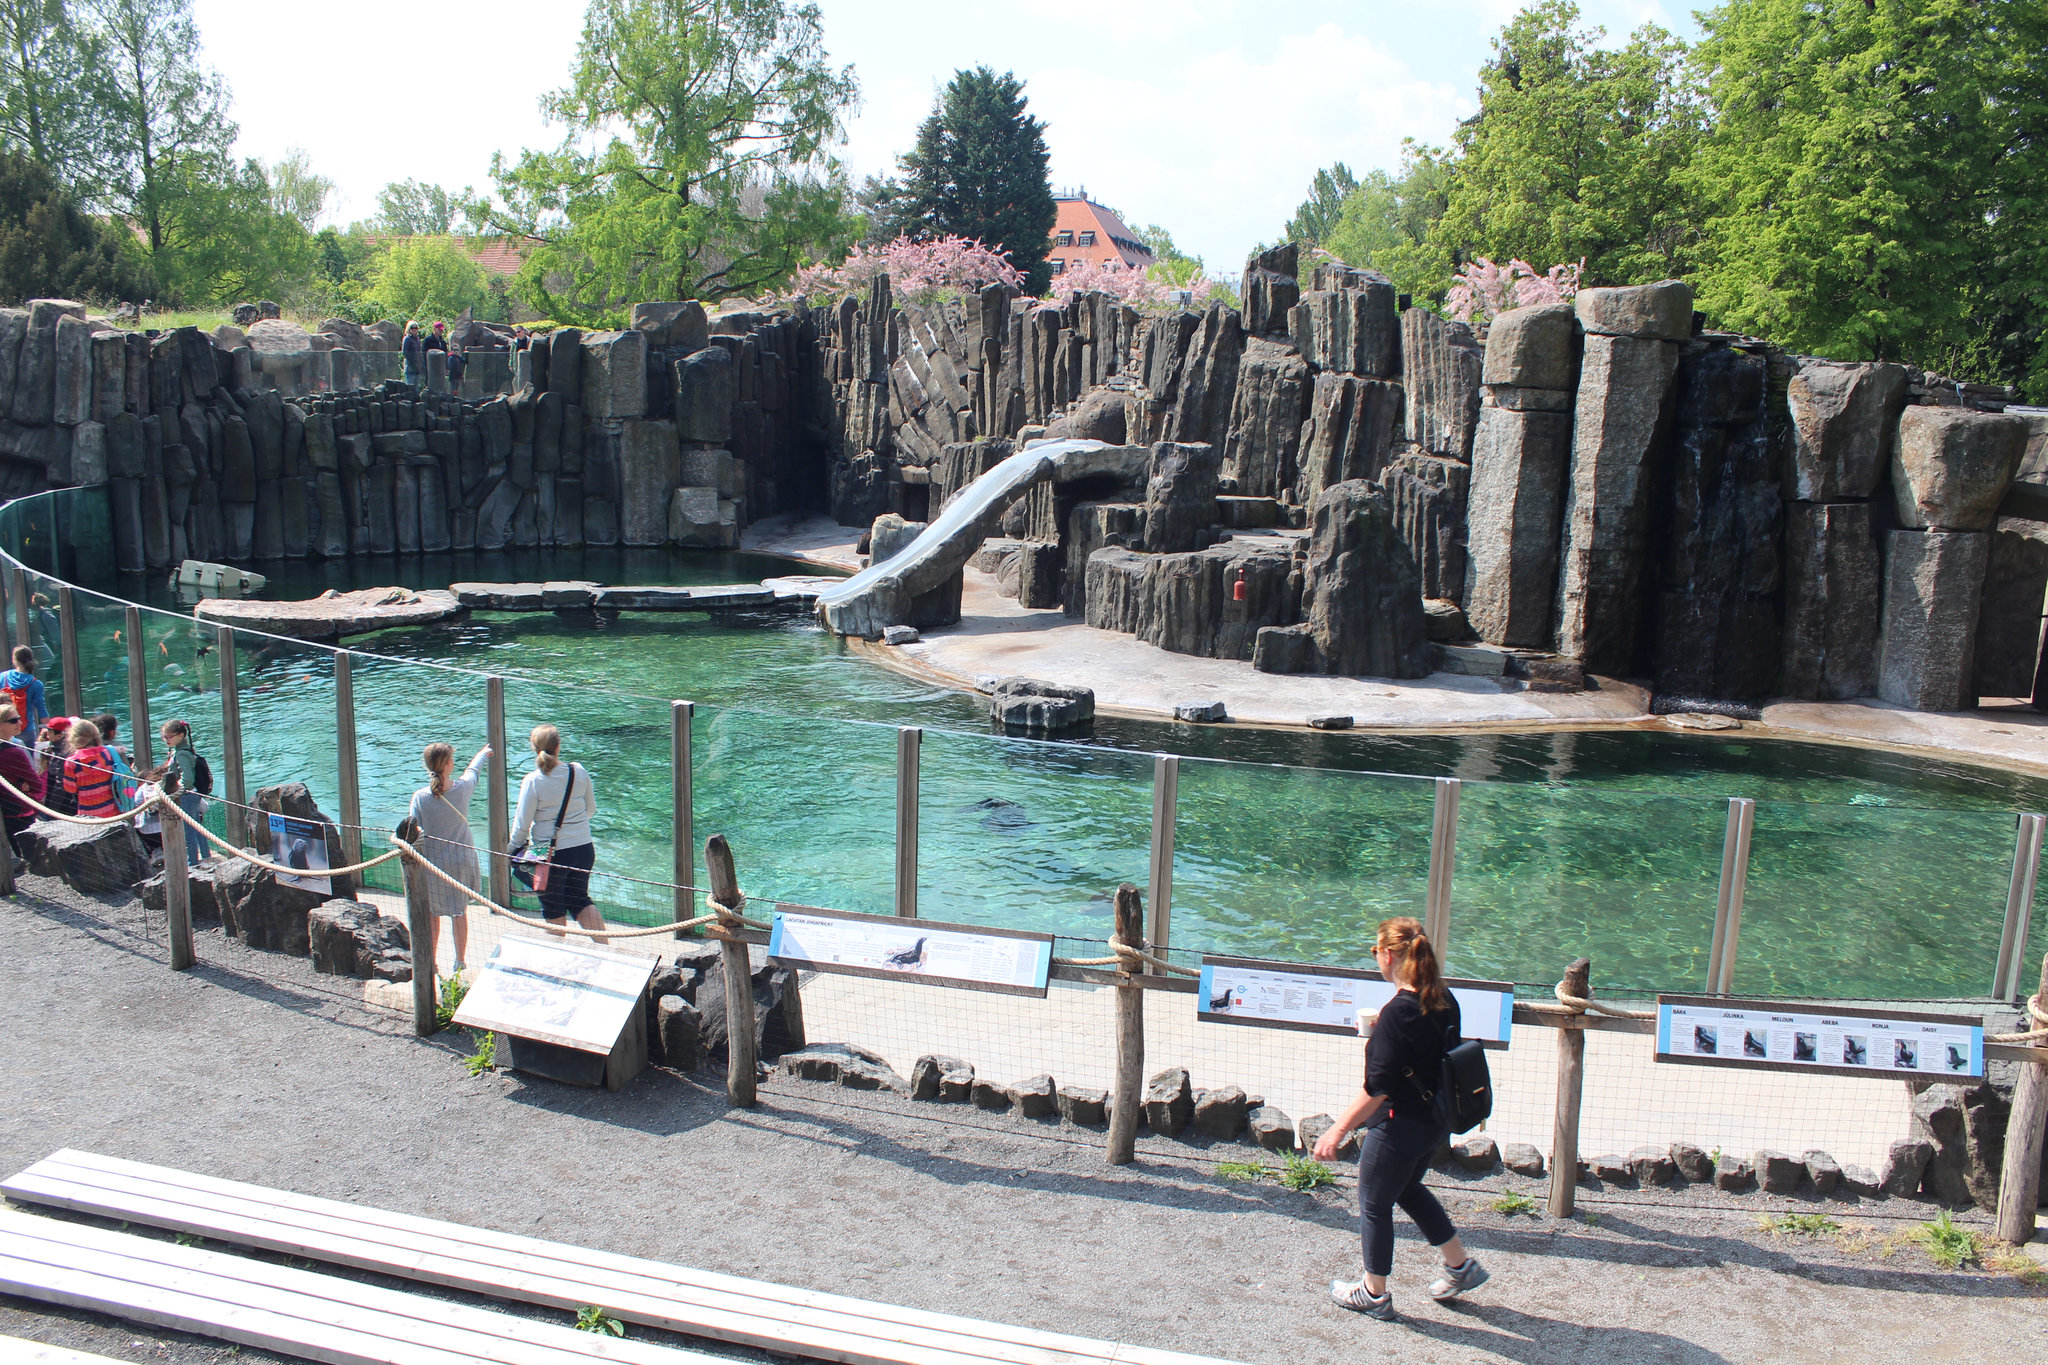 Exposition of the sea lions in Prague Zoo